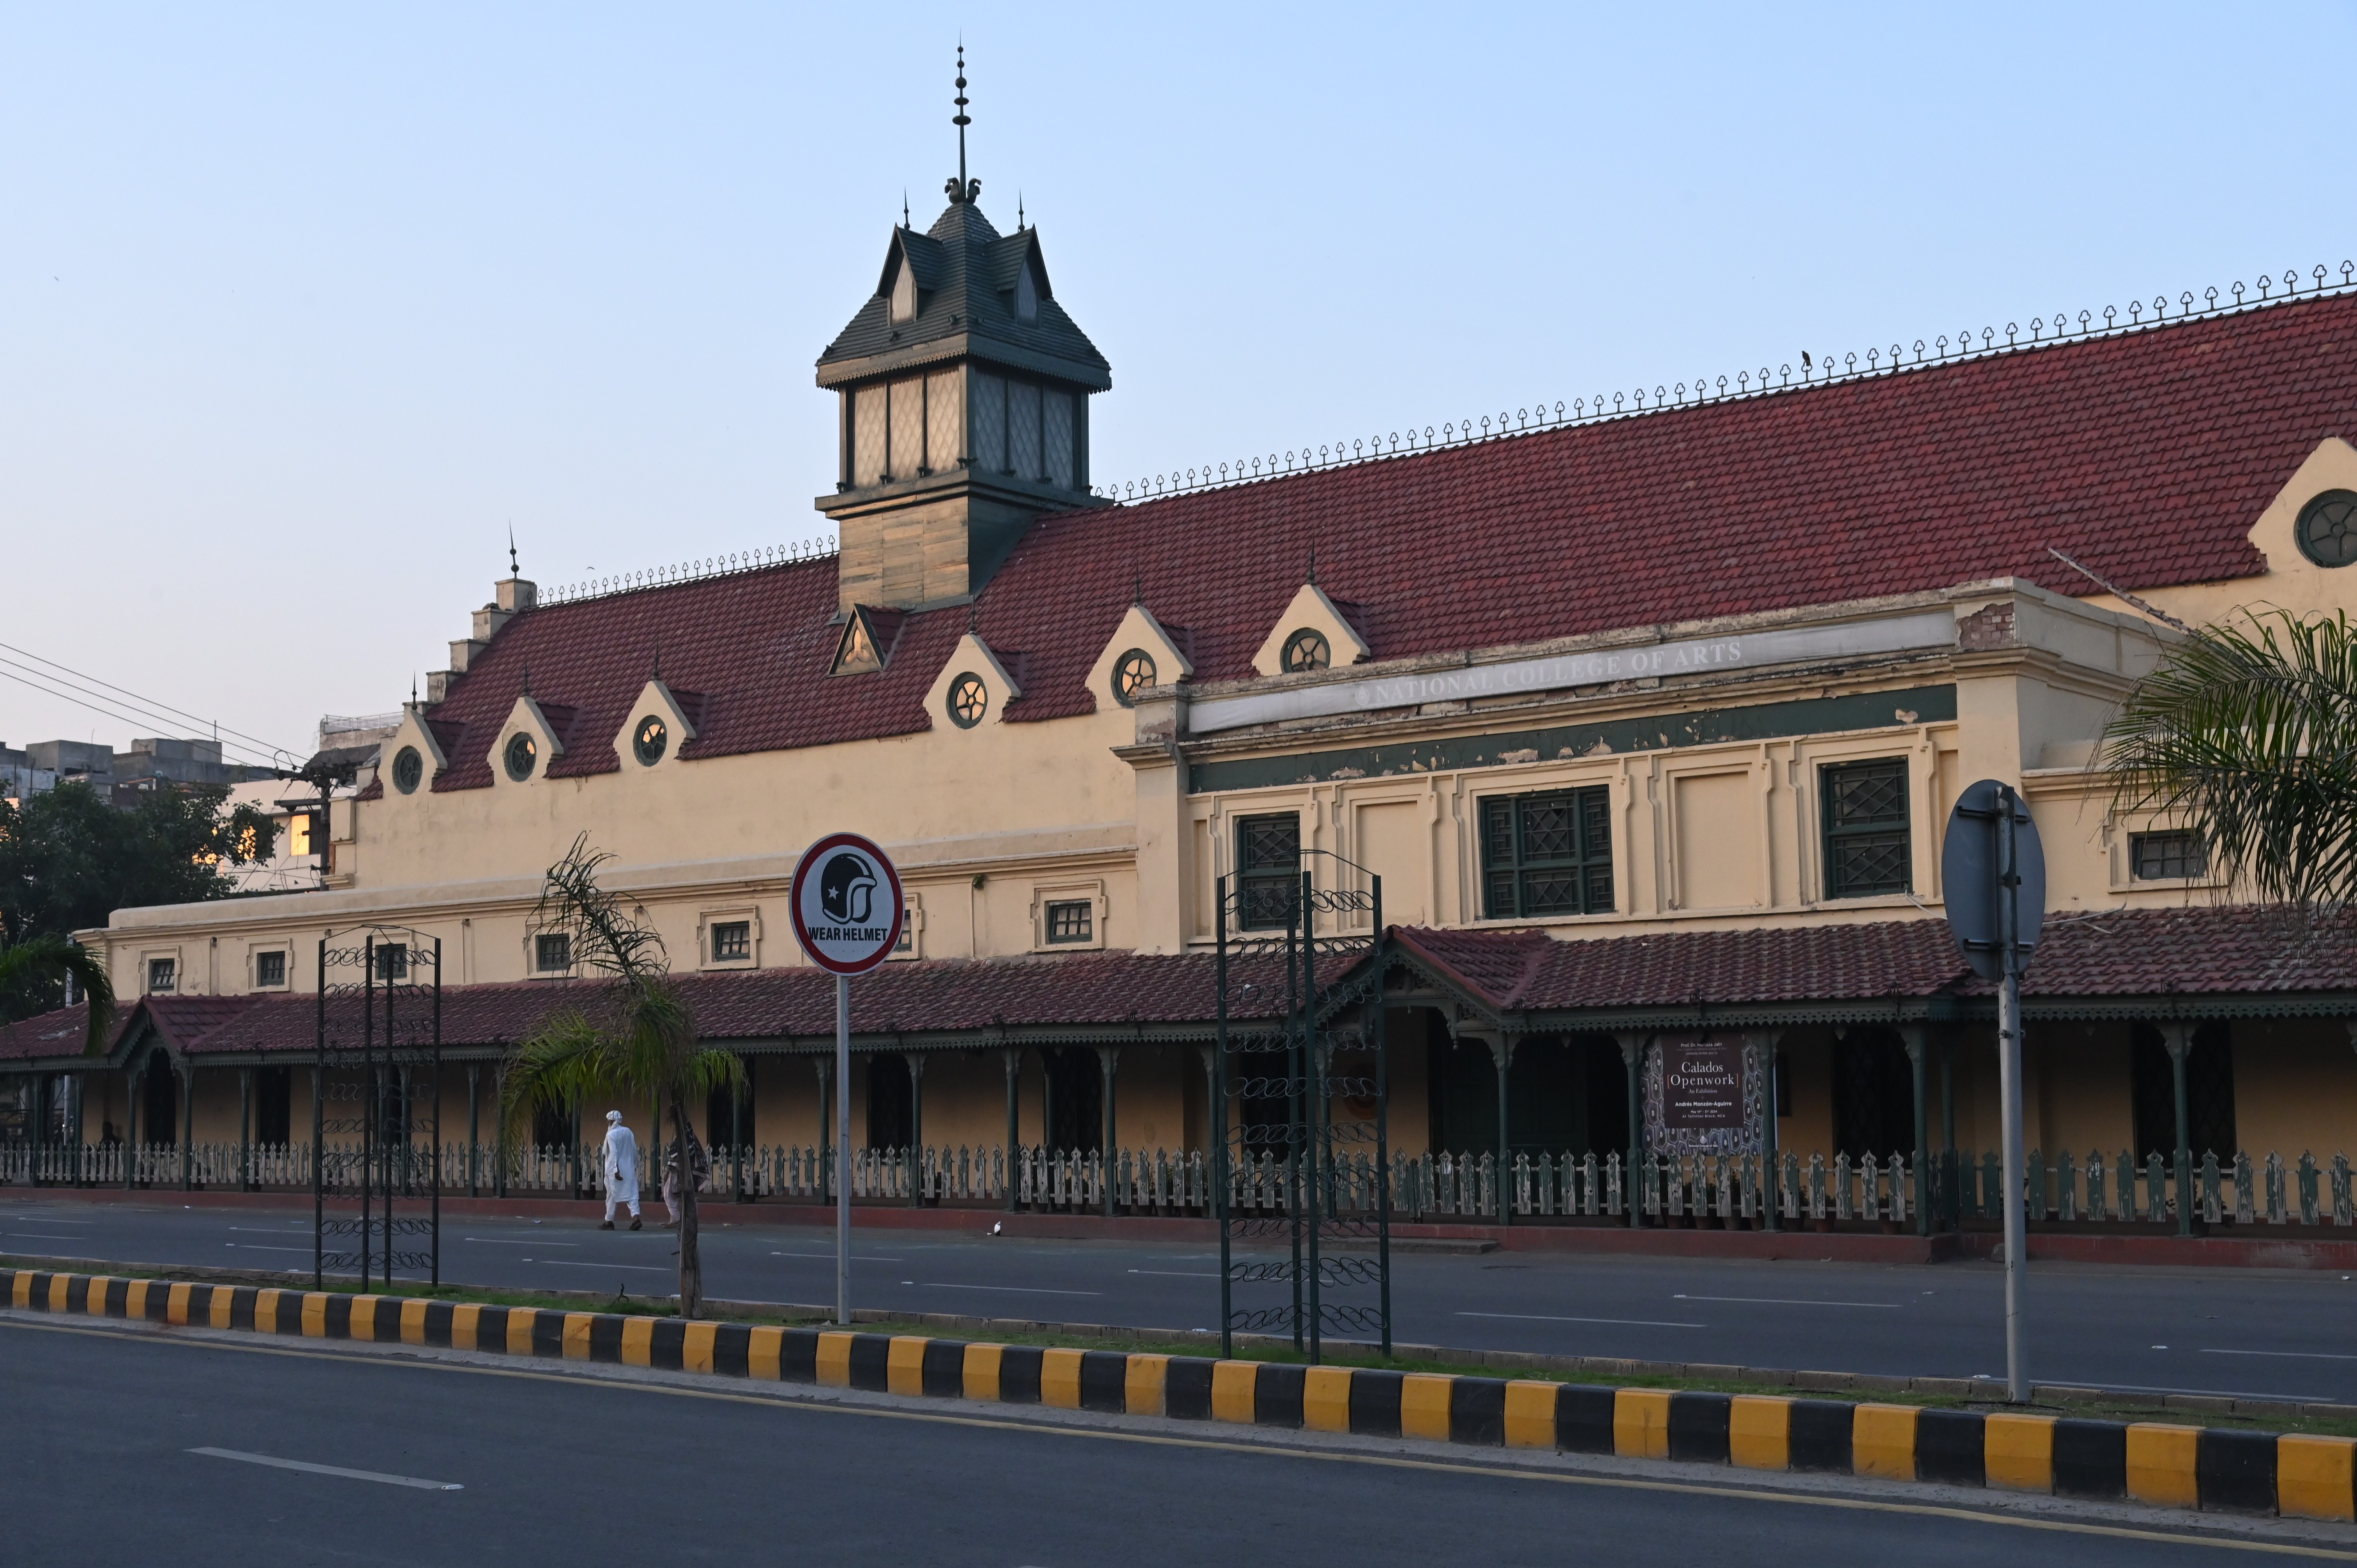 Lahore museum previously called as Old Tollinton Market